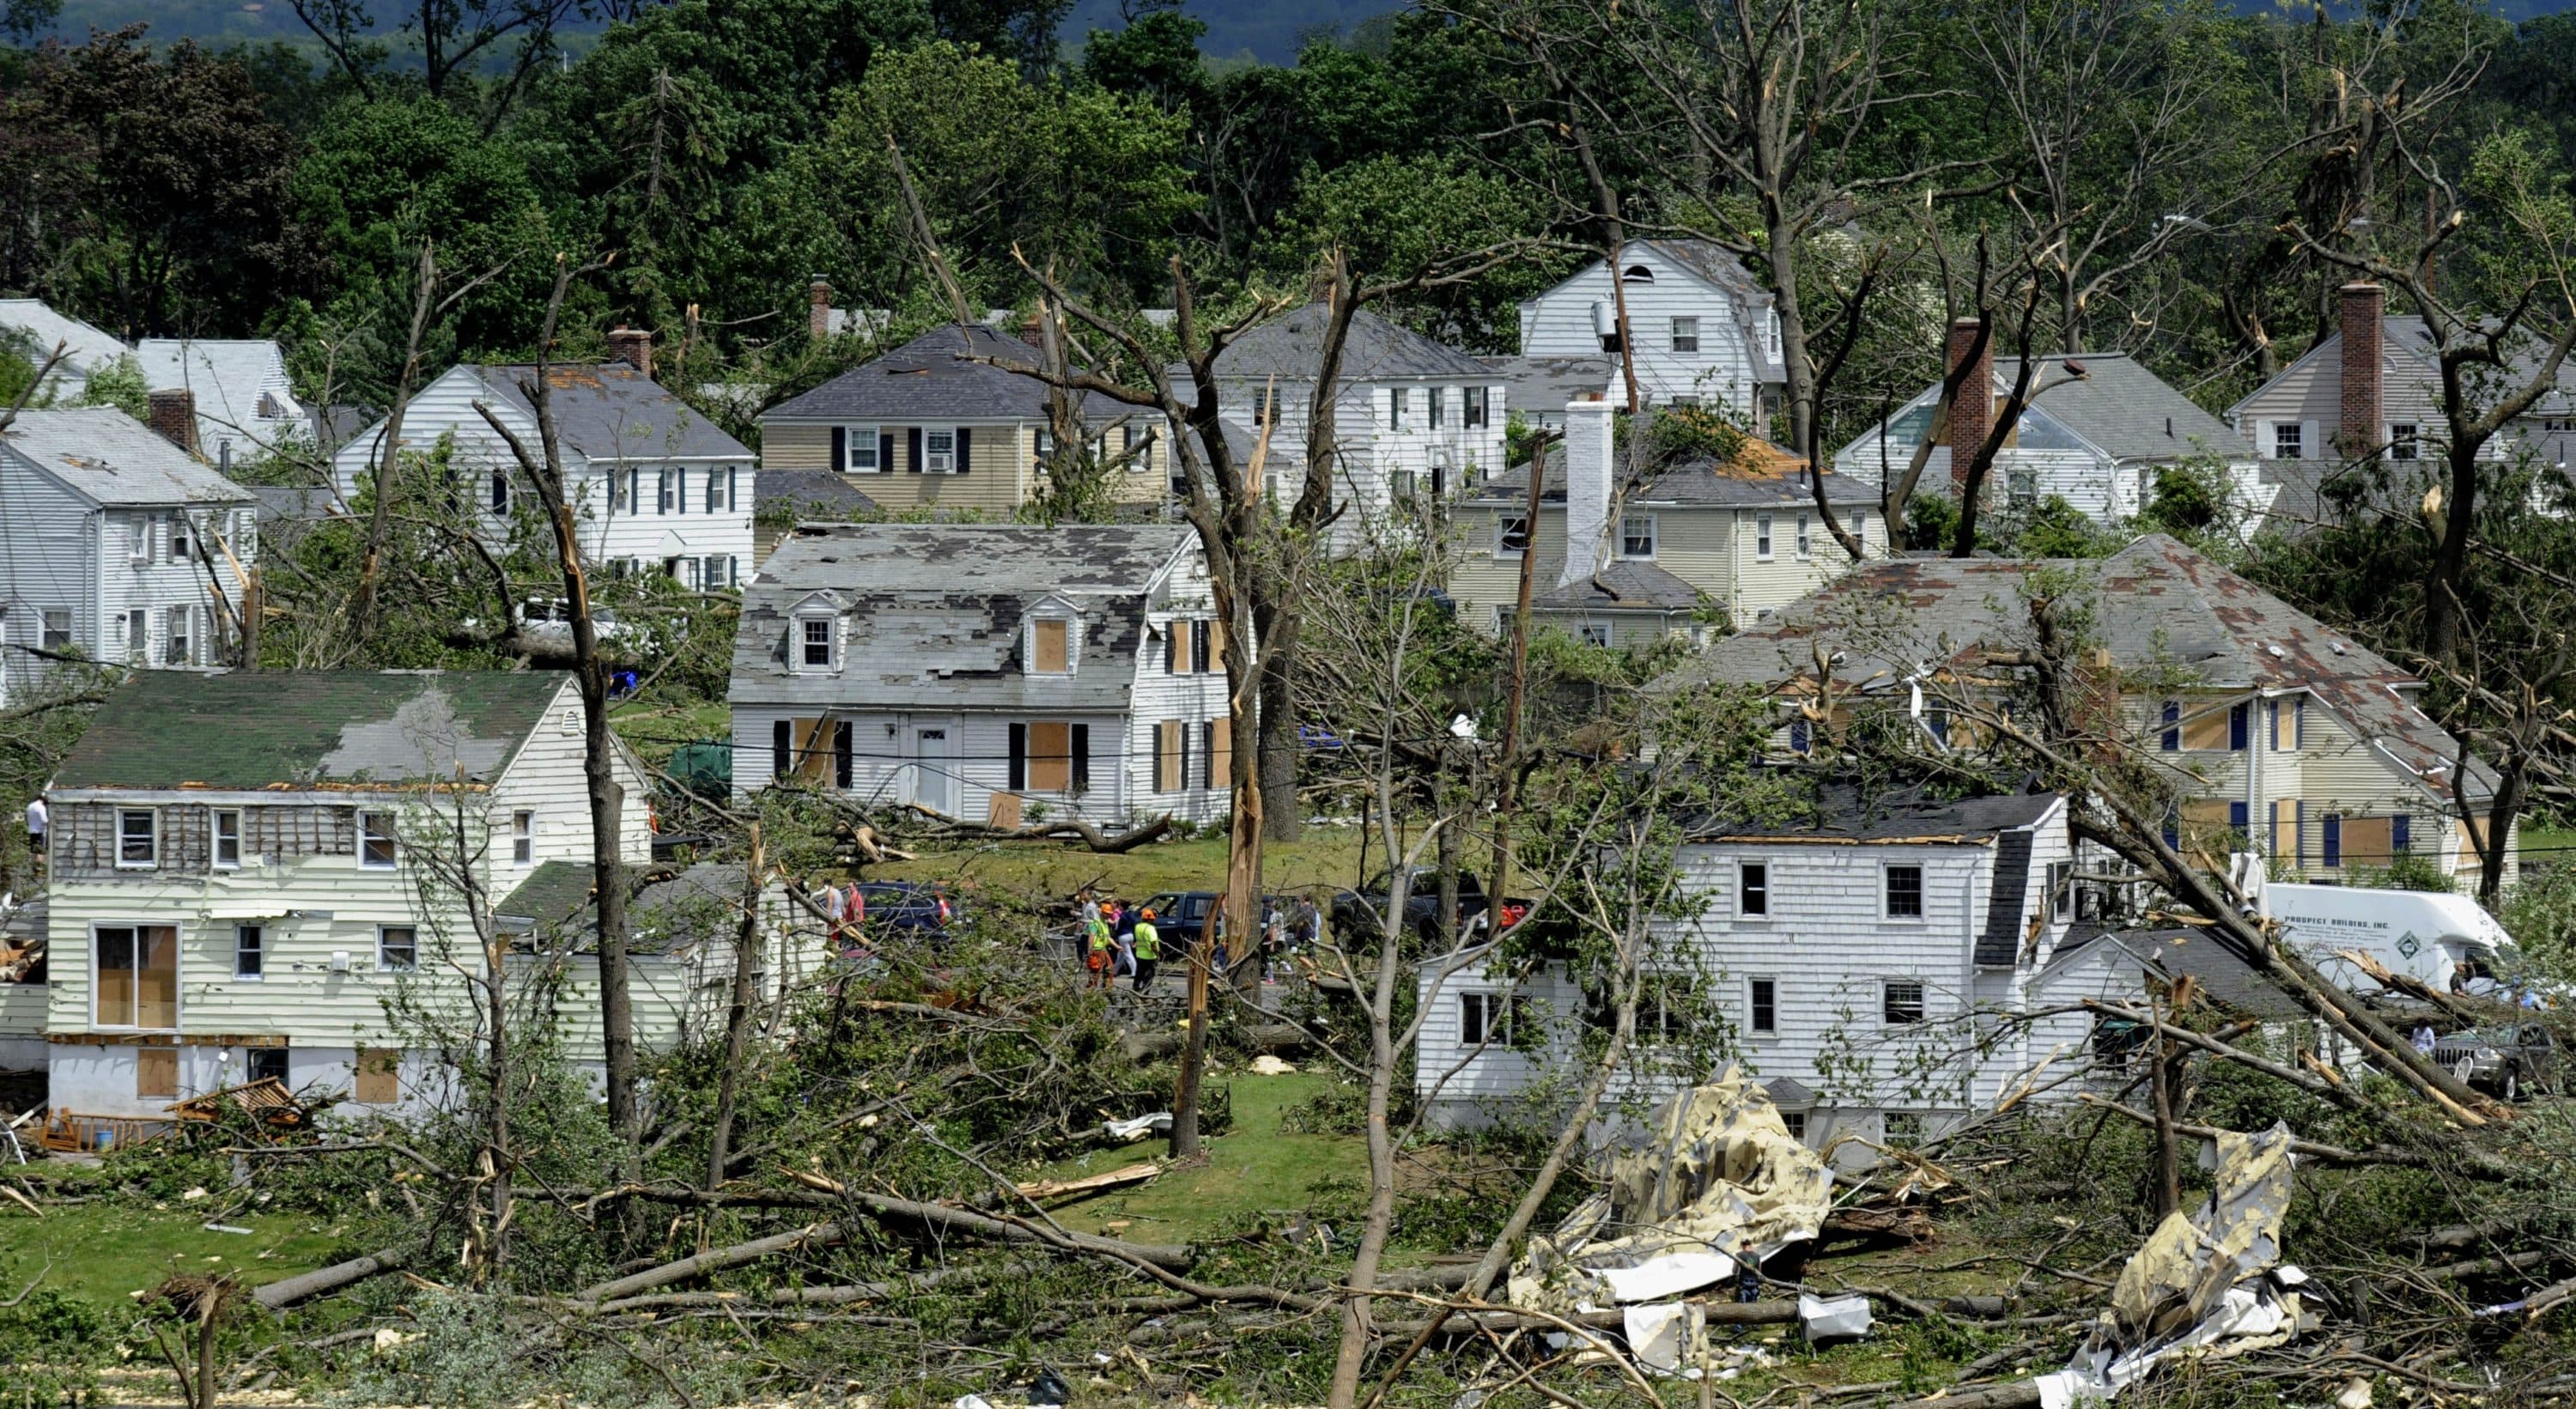 Homes are seen on June 2, 2011, a day after a tornado in Springfield, Mass. damaged several neighborhoods. (Jessica Hill/AP)